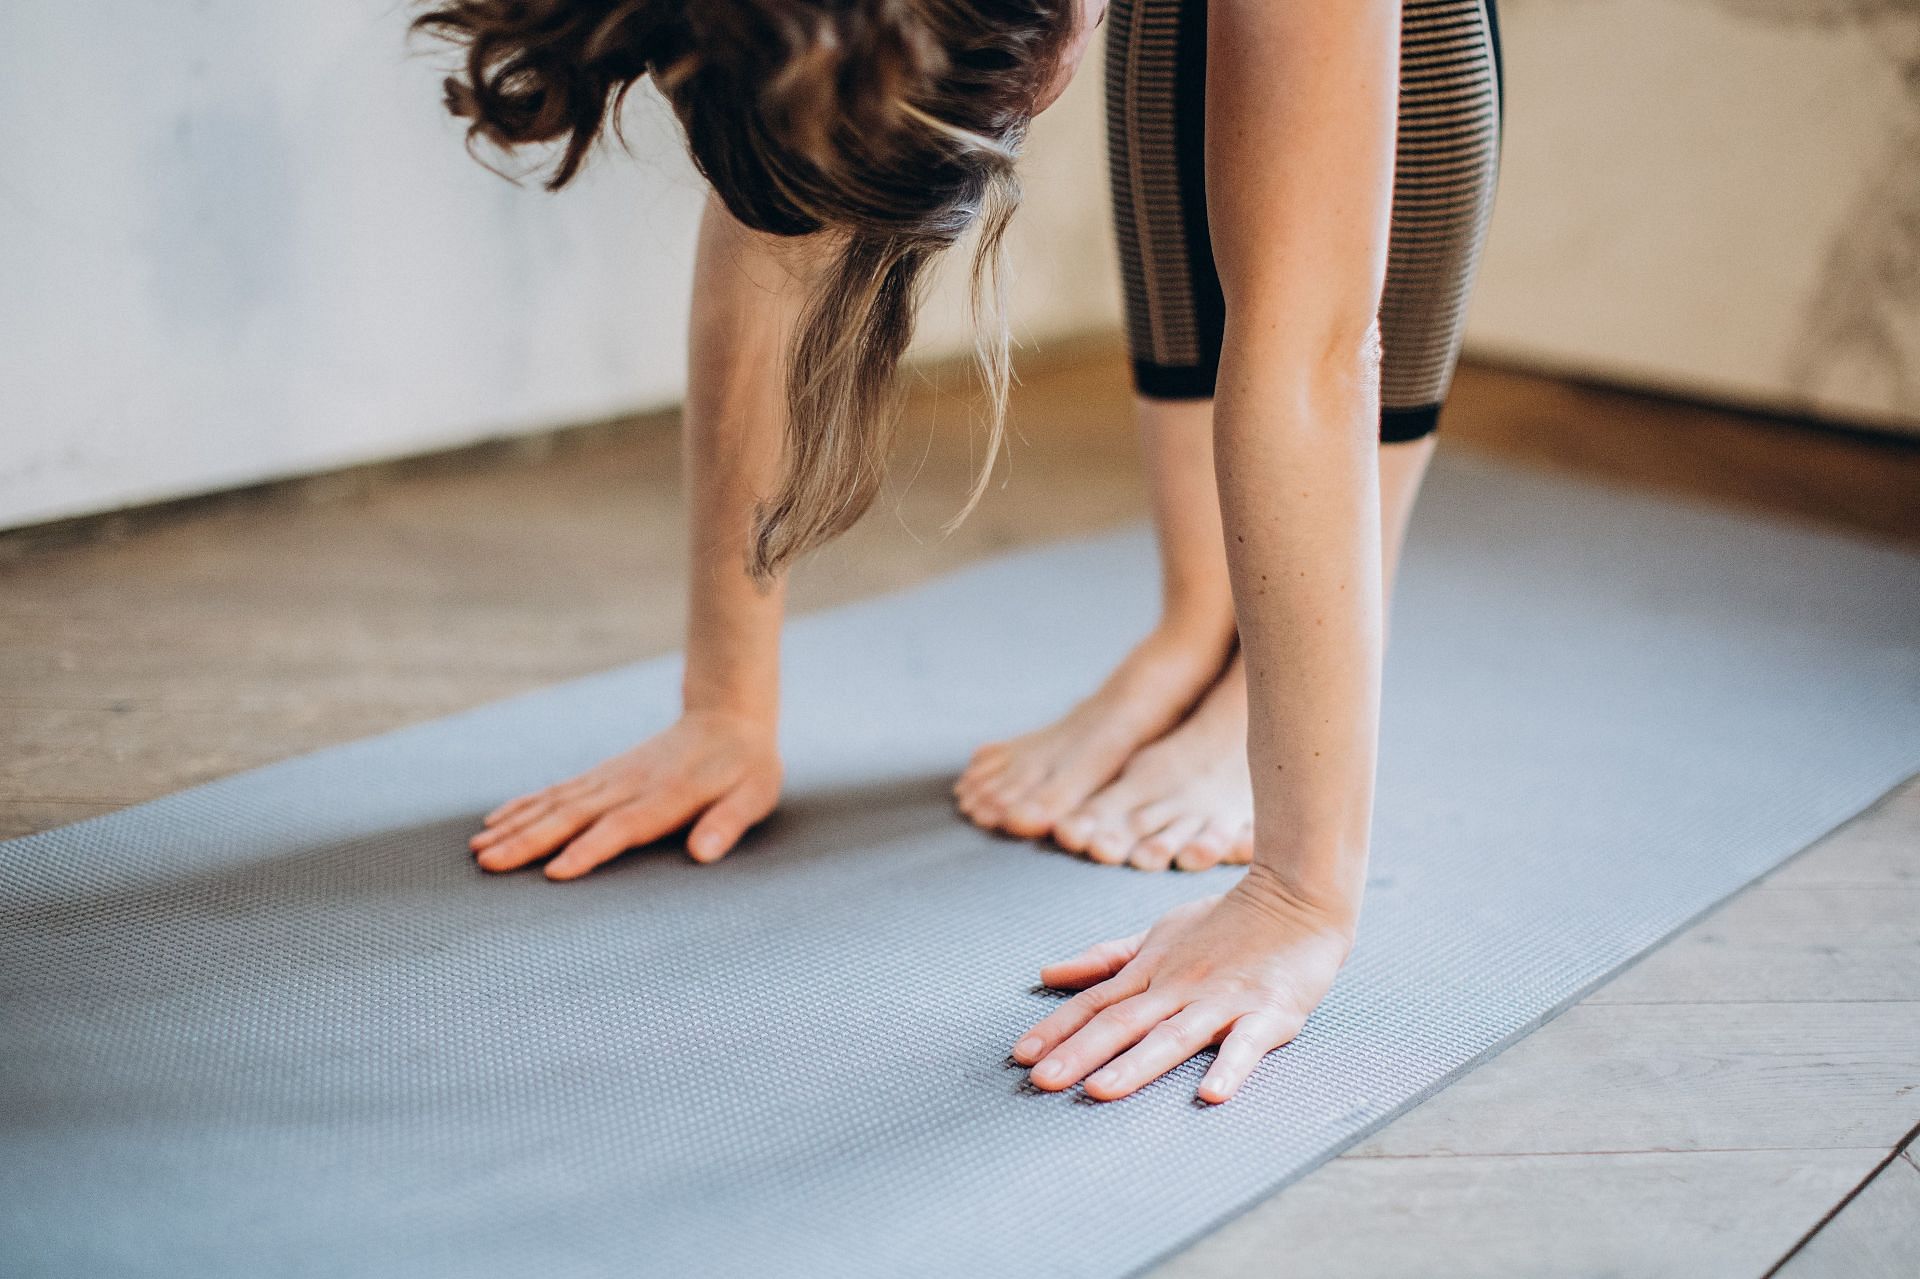 Wall Roll Downs are one of the most challenging pilate exercises. (Image via Pexels / Elina Fairytale)